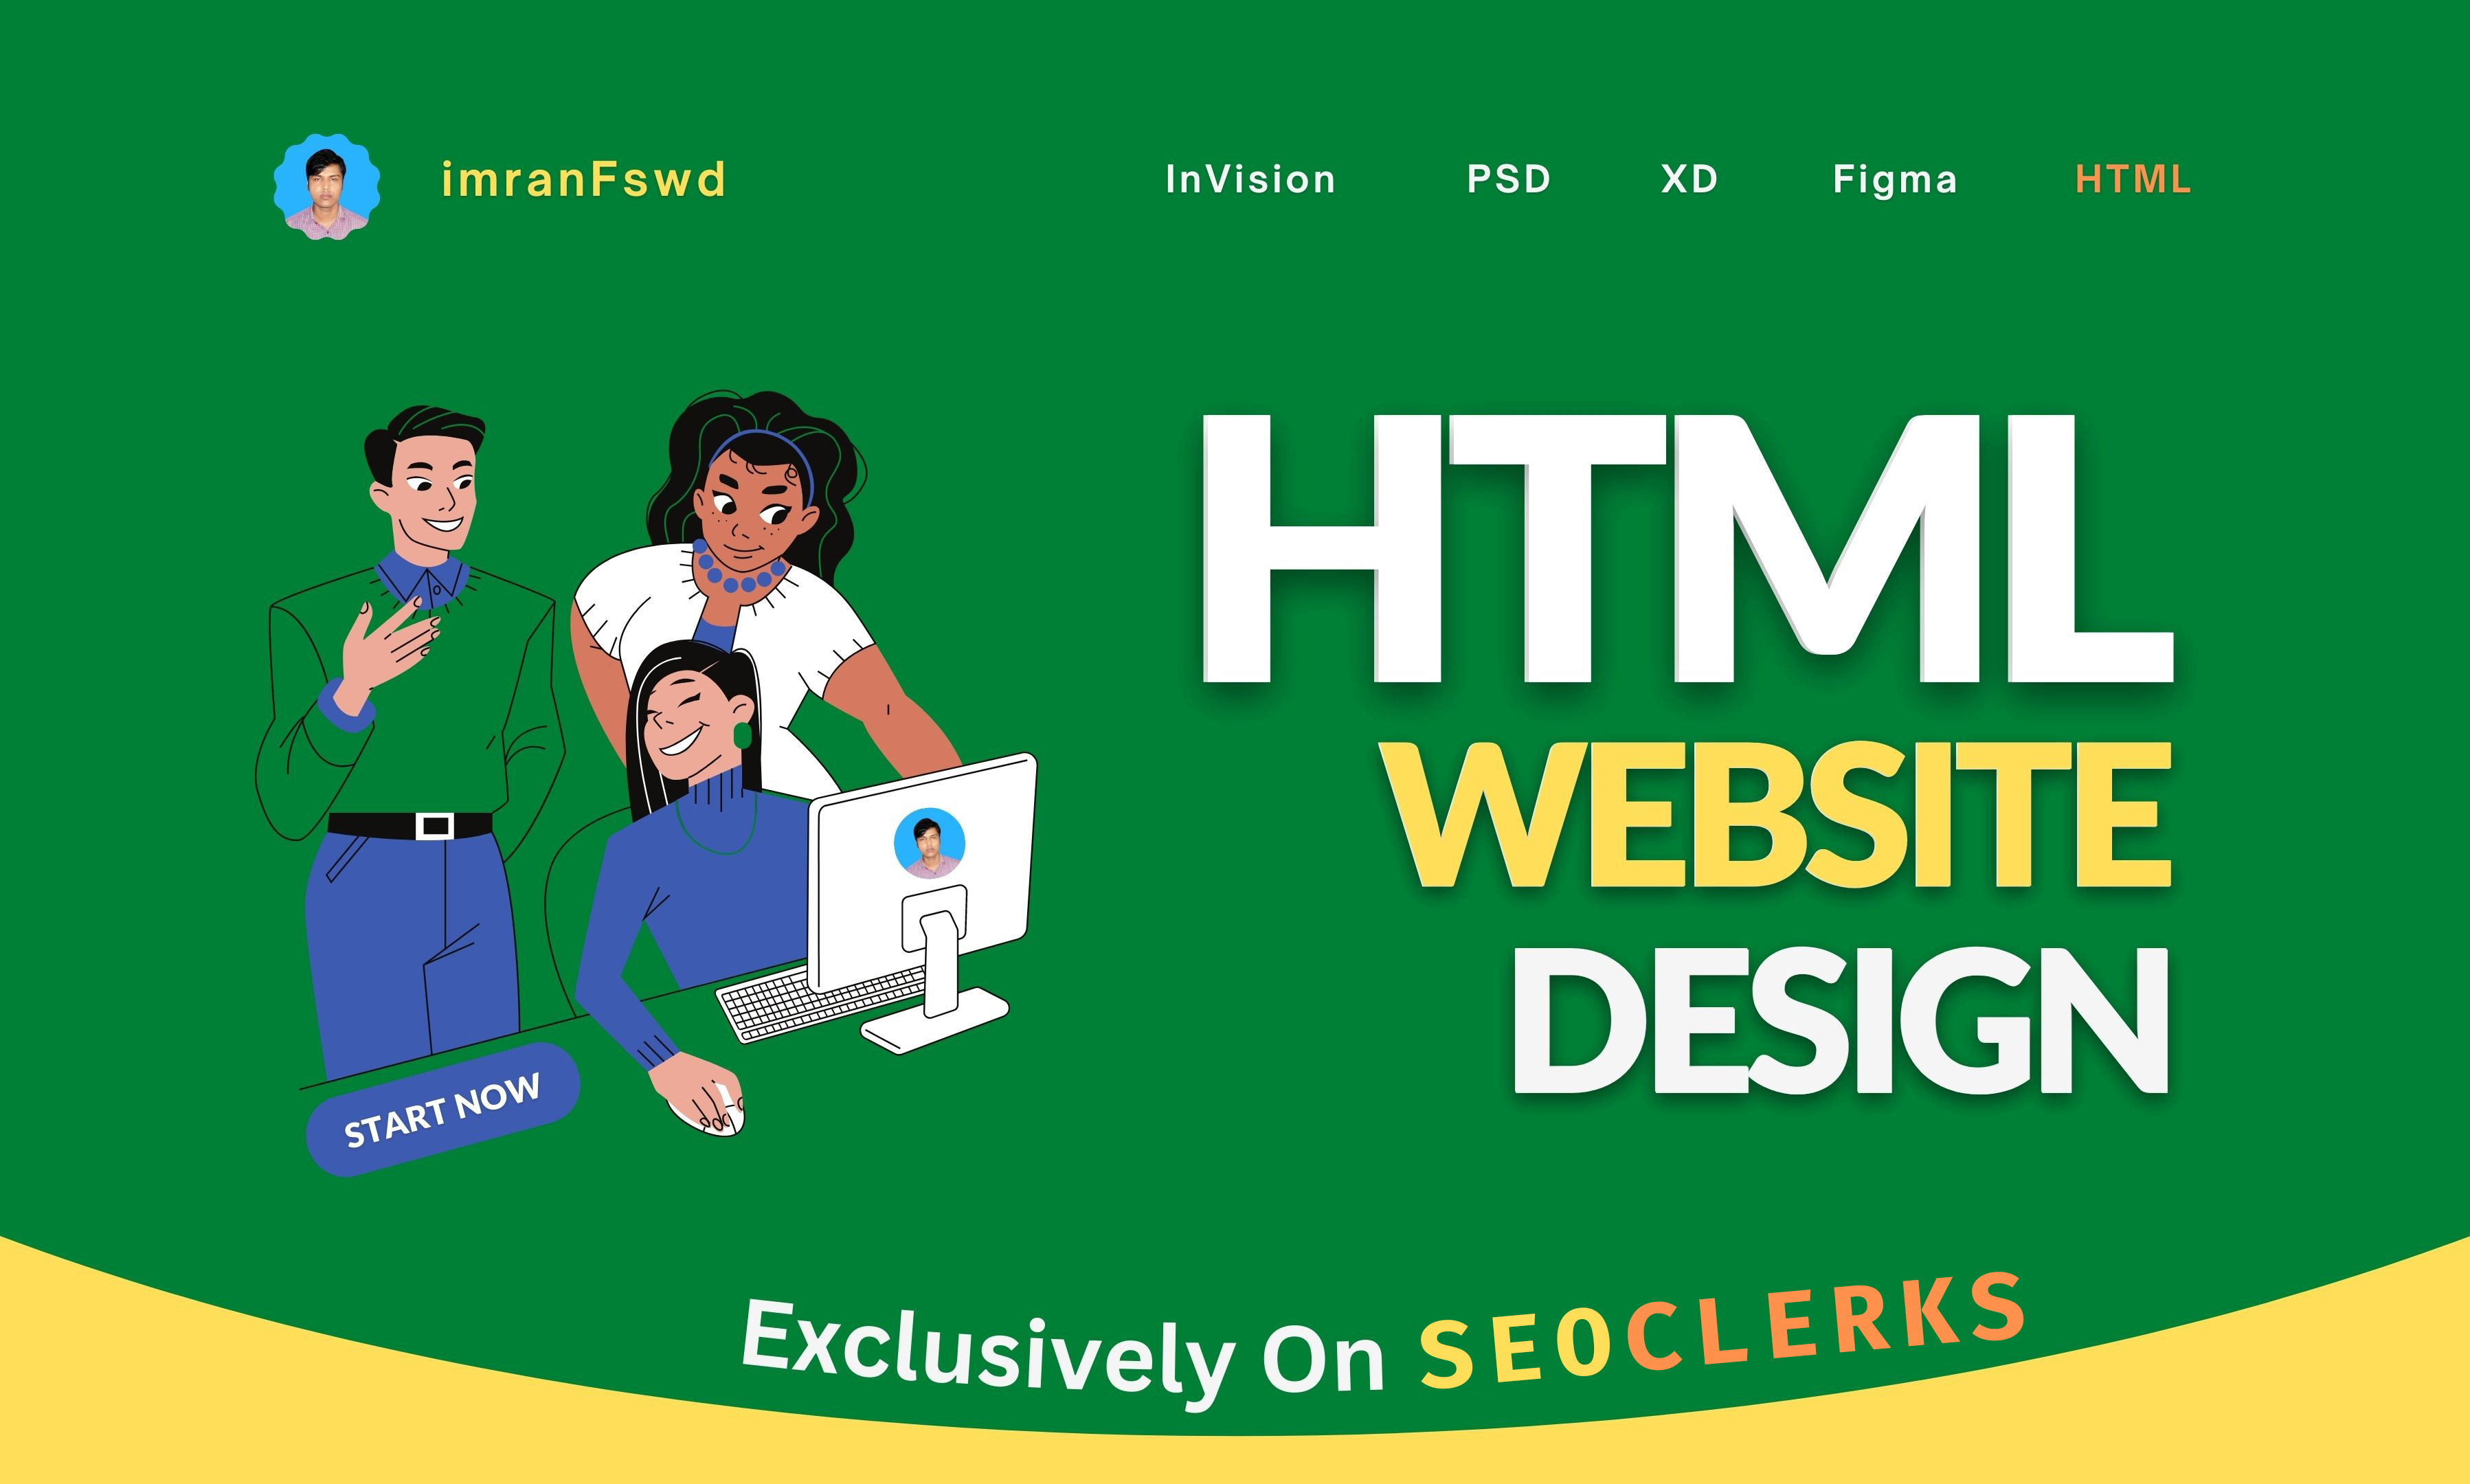 I Will Build HTML CSS Website, Convert Figma To HTML Website, XD To HTML Website Design Basic